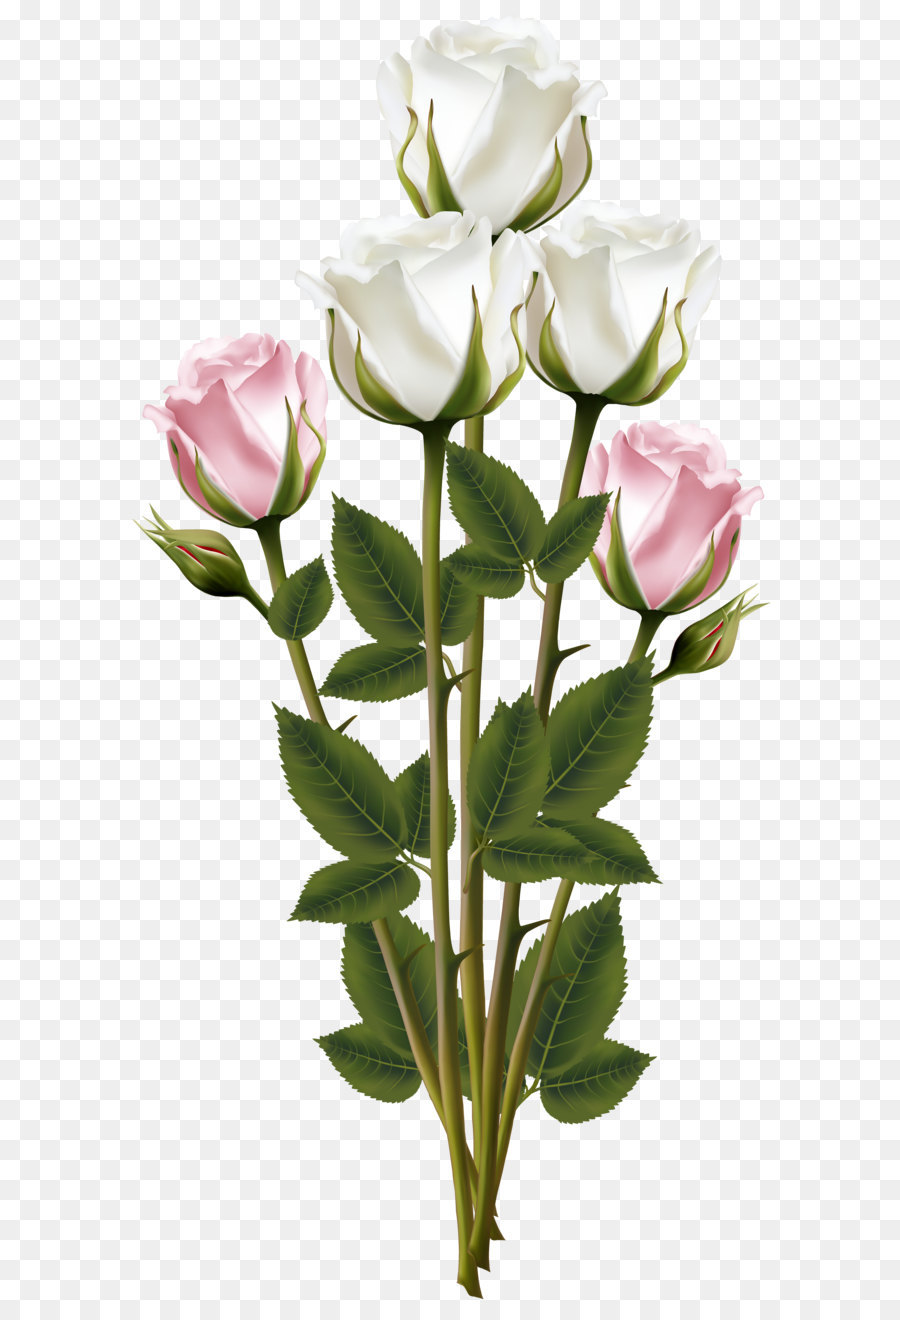 white and pink rose bouquet transparent png clip art image 5a1bad2e7b08f6